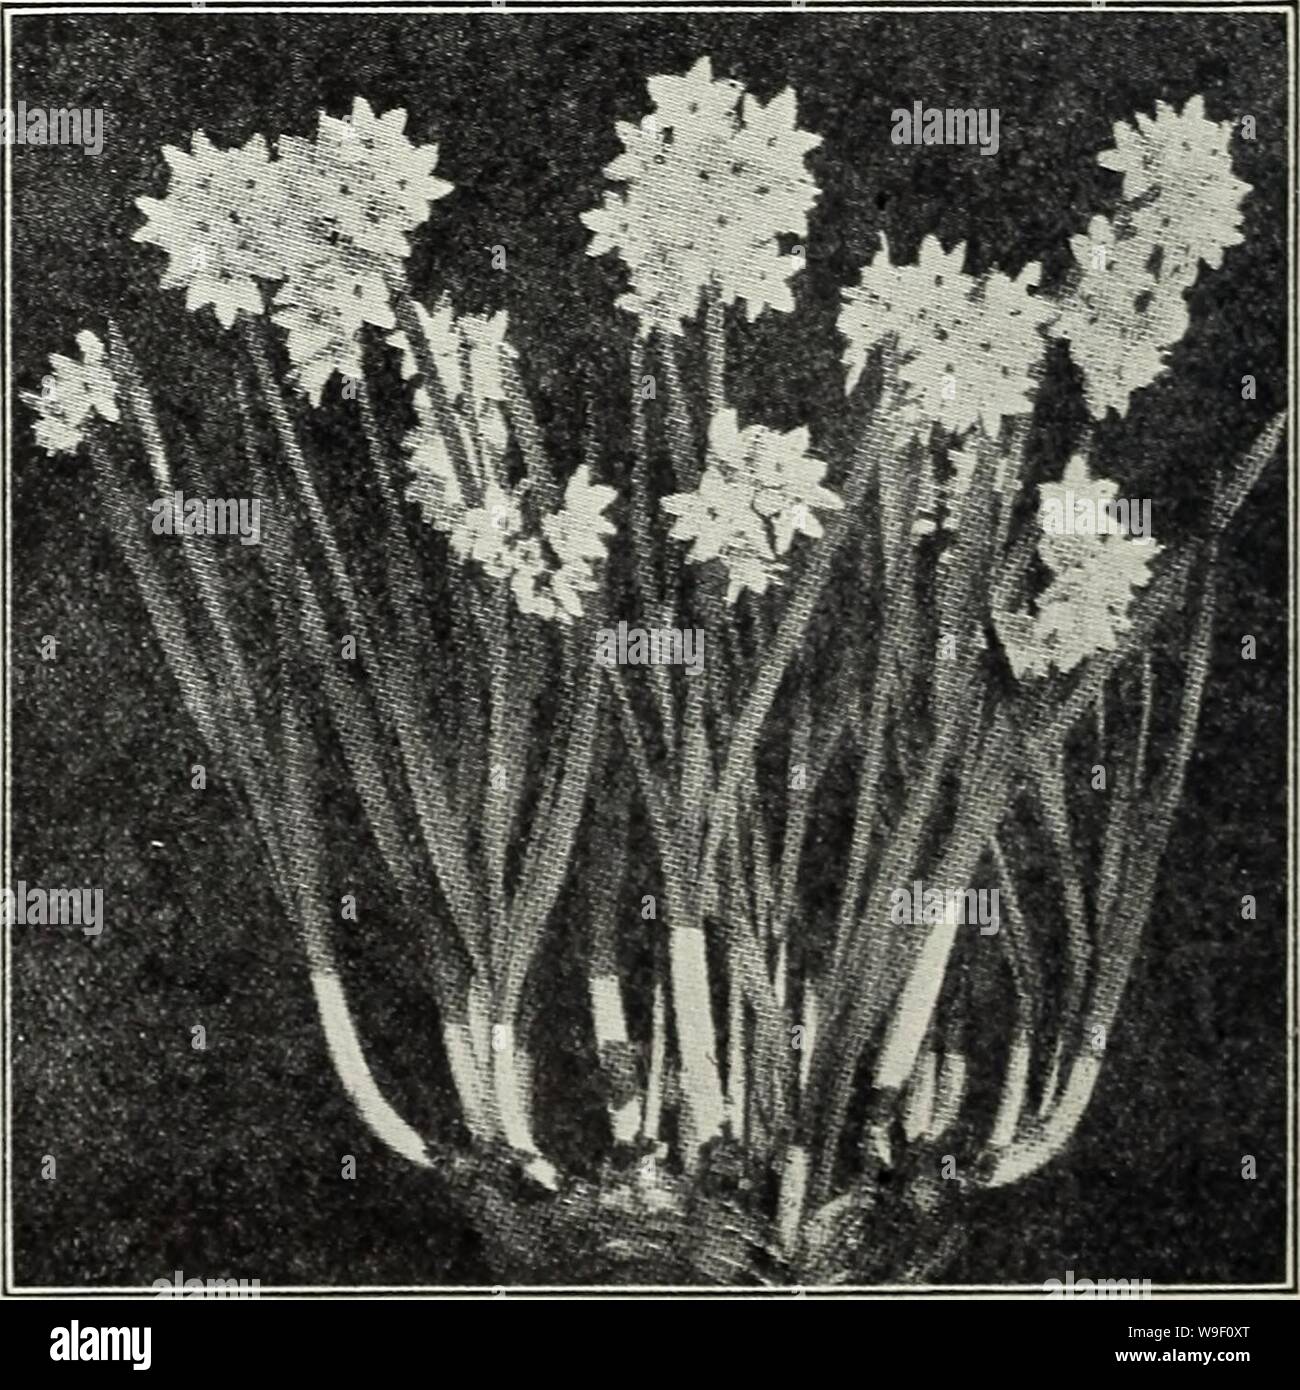 Archive image from page 7 of Currie's bulbs and plants . Currie's bulbs and plants : autumn 1928  curriesbulbsplan19curr Year: 1928 ( Water Flowering Narcissi Ready for Delivery in September. Polyanthus Narcissus (Bunch Flovered) The Polyanthus Narcissus are general favorites for indoor culture, succeeding- equally well planted in soil or in water. They can readily be brought into bloom in six weeks from the time of planting. For water culture all that is necessary is to place the bulbs in a bowl with a few pebbles to support them, or better use a small quantity of prepared fibre instead of th Stock Photo